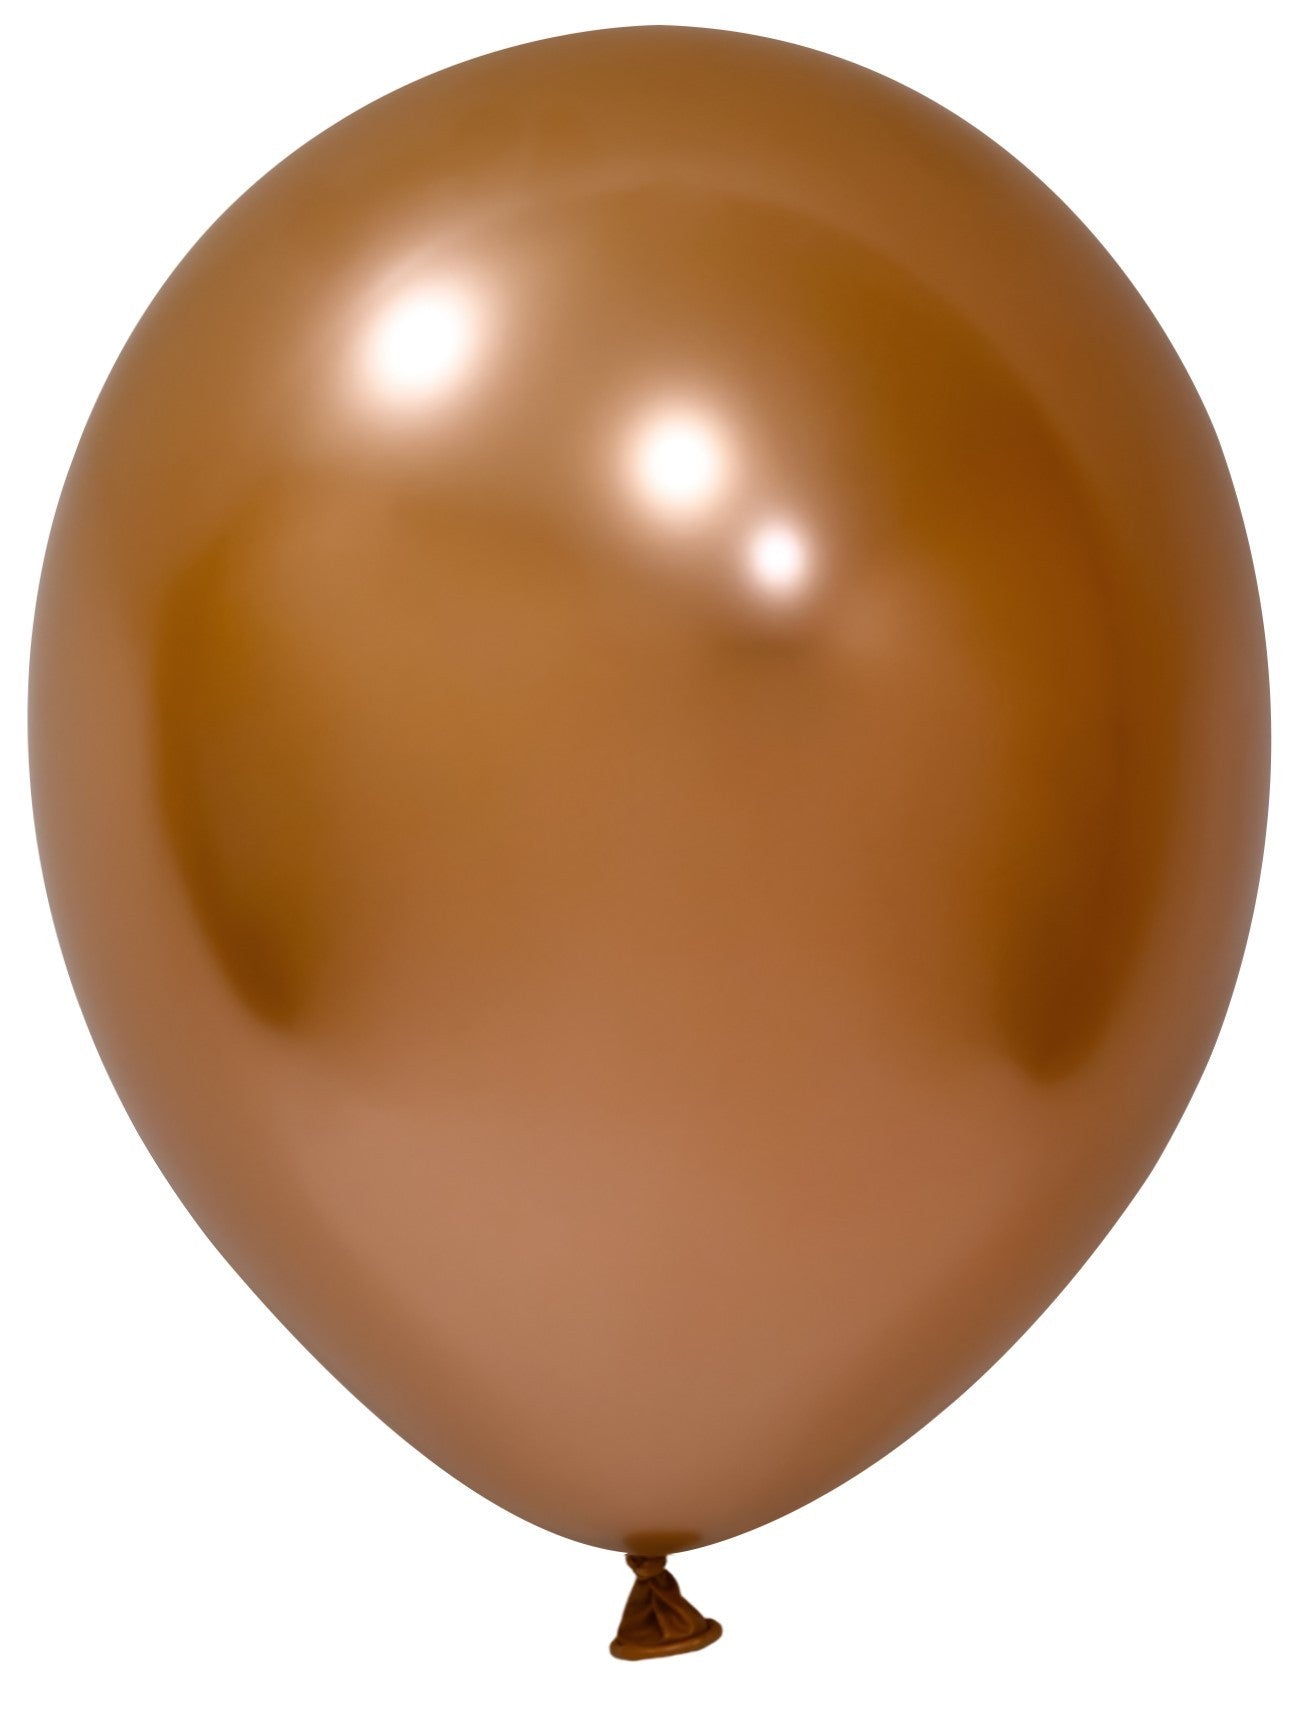 View Copper Chrome Latex Balloon 10inch Pack of 50 information